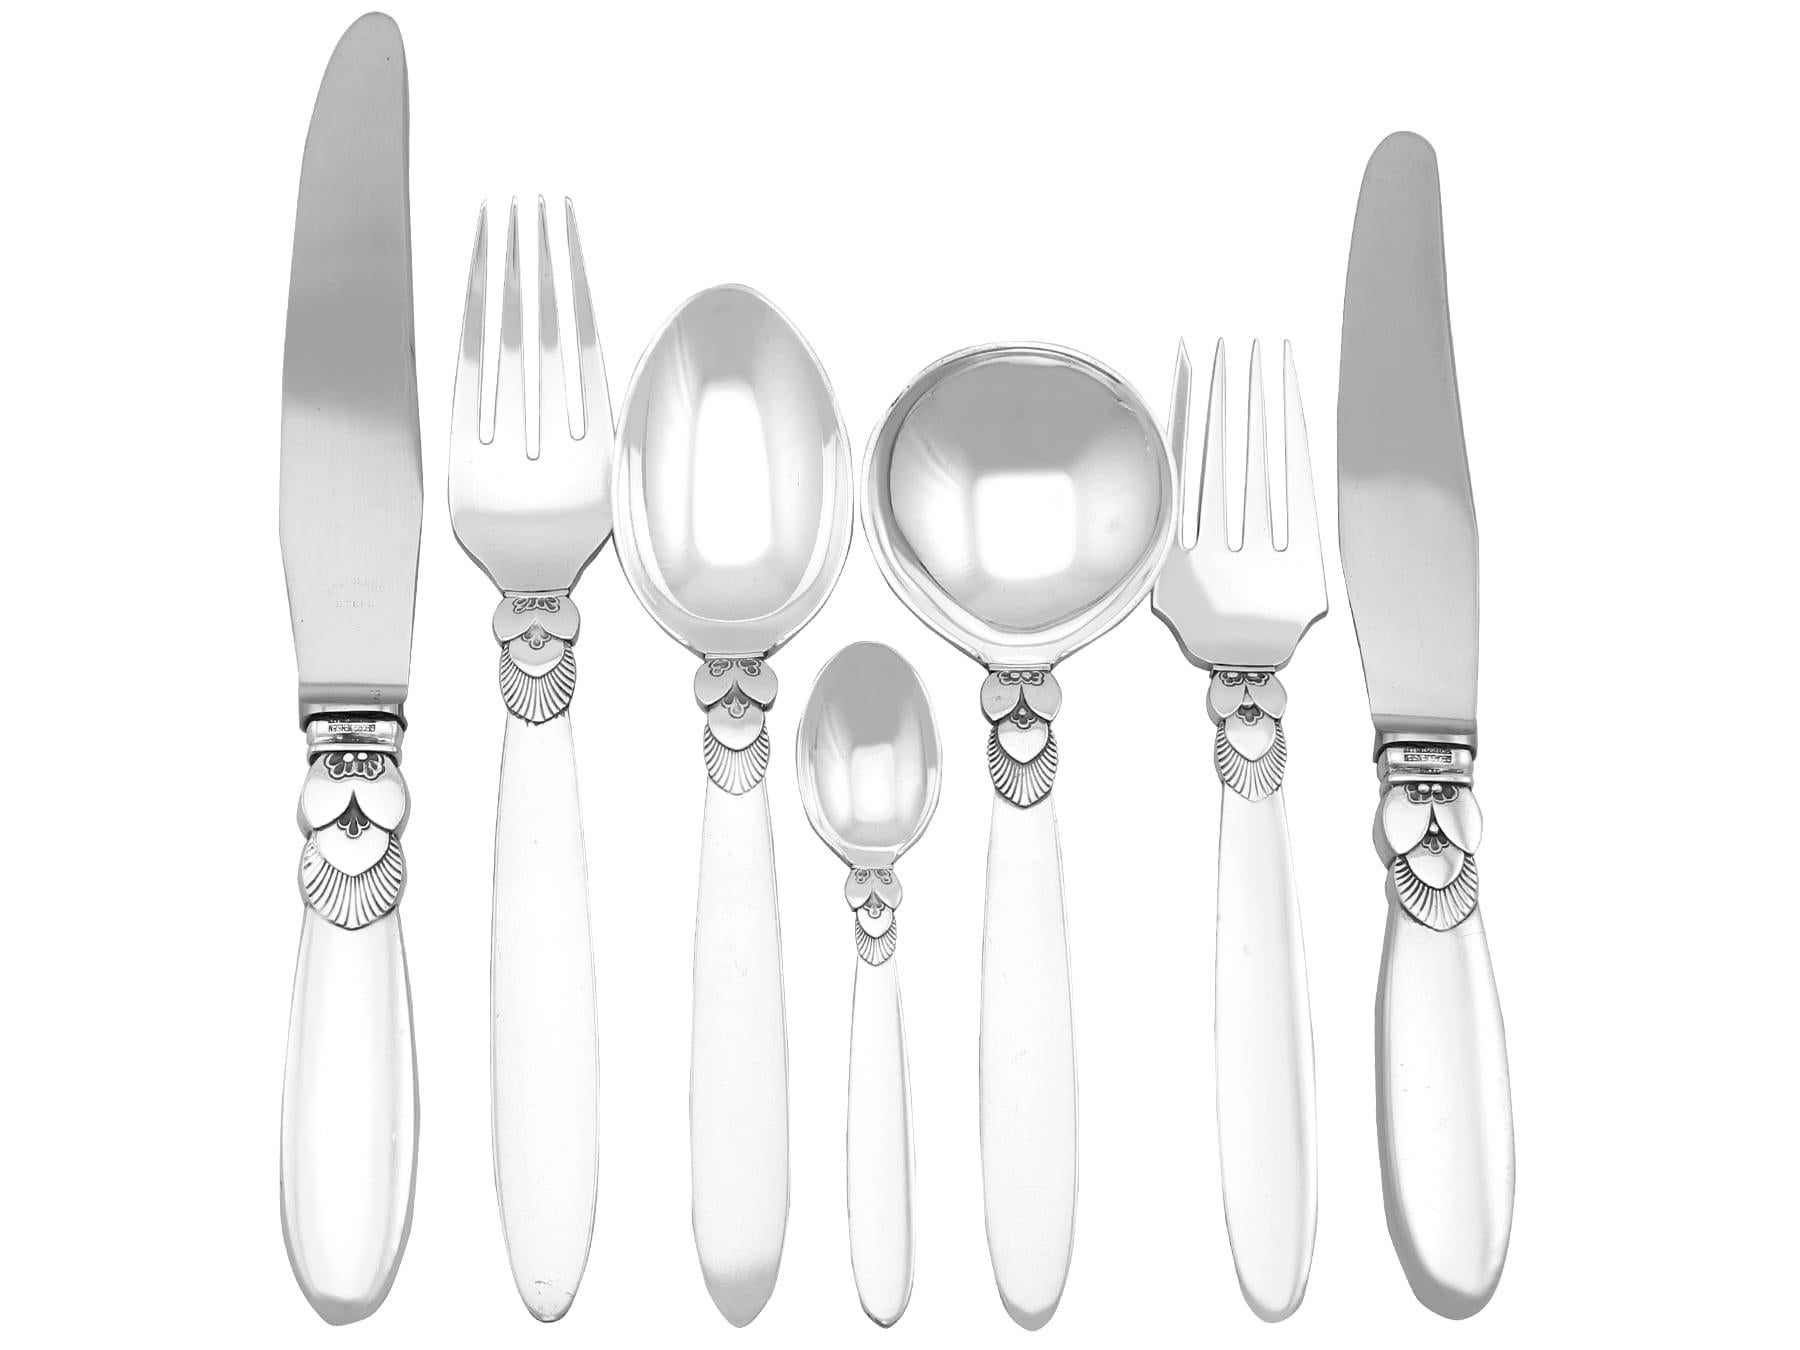 An exceptional, fine and impressive vintage Danish sterling silver Cactus pattern canteen of cutlery for six persons made by Georg Jensen; an addition to our antique flatware sets

The pieces of this exceptional vintage Danish silver cutlery